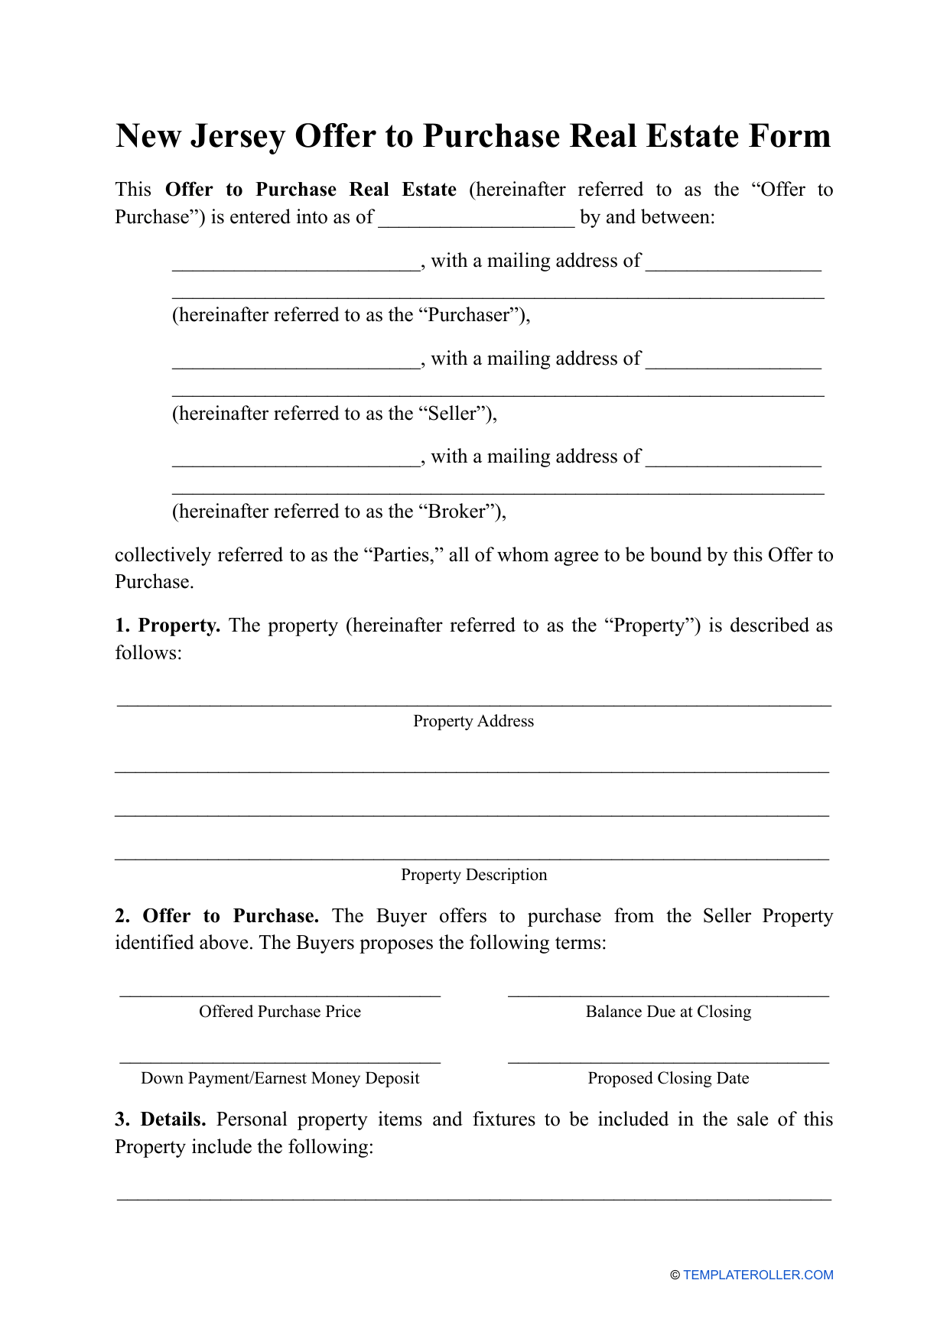 Offer to Purchase Real Estate Form - New Jersey, Page 1